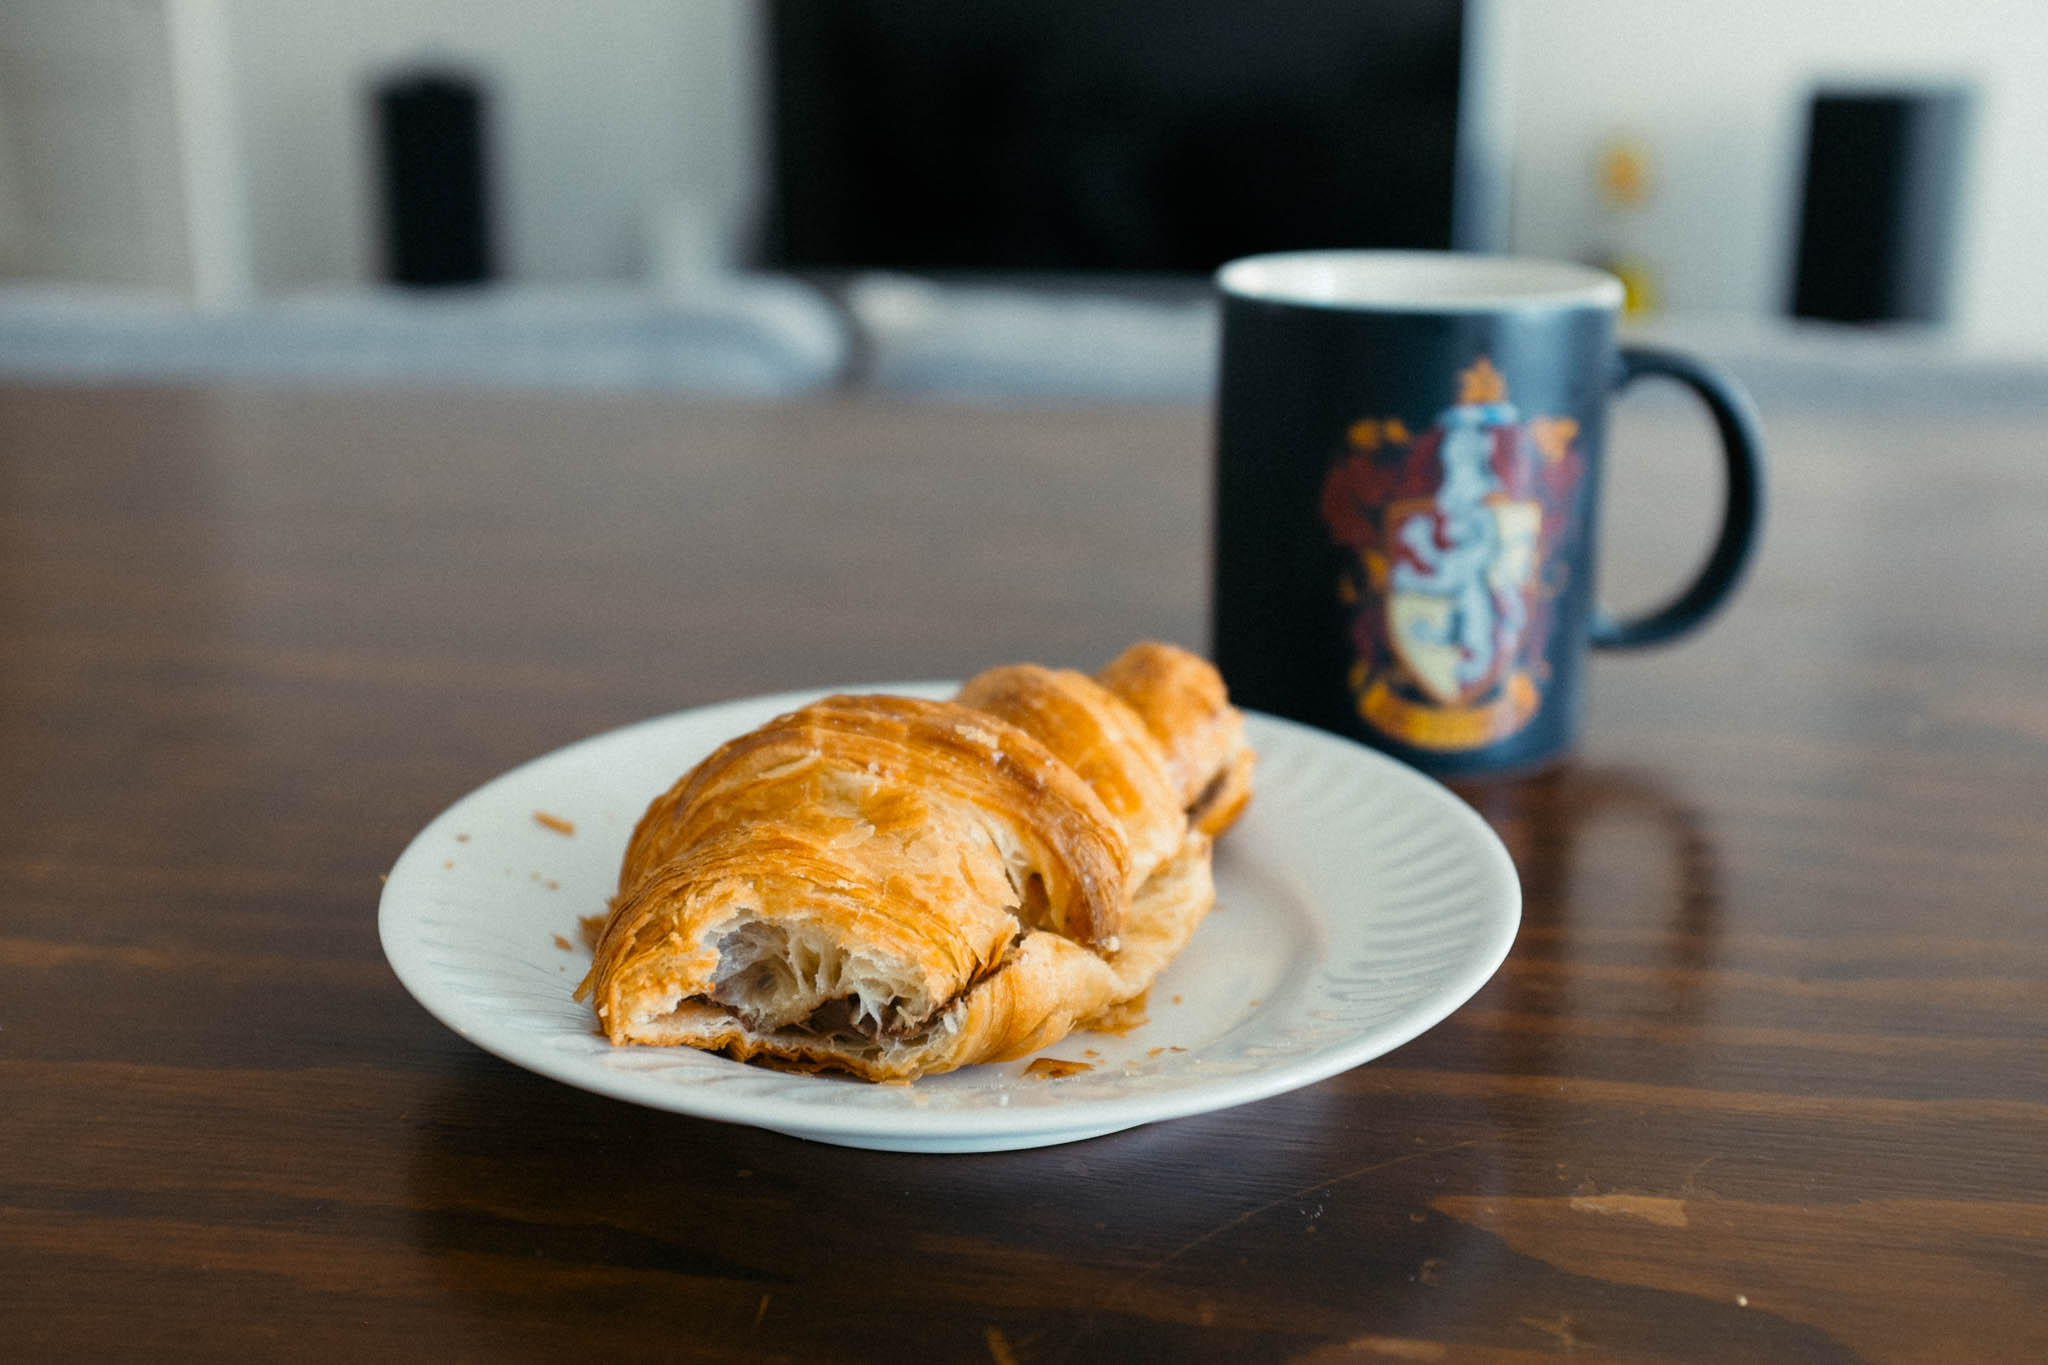 French croissant with nutella, yum.